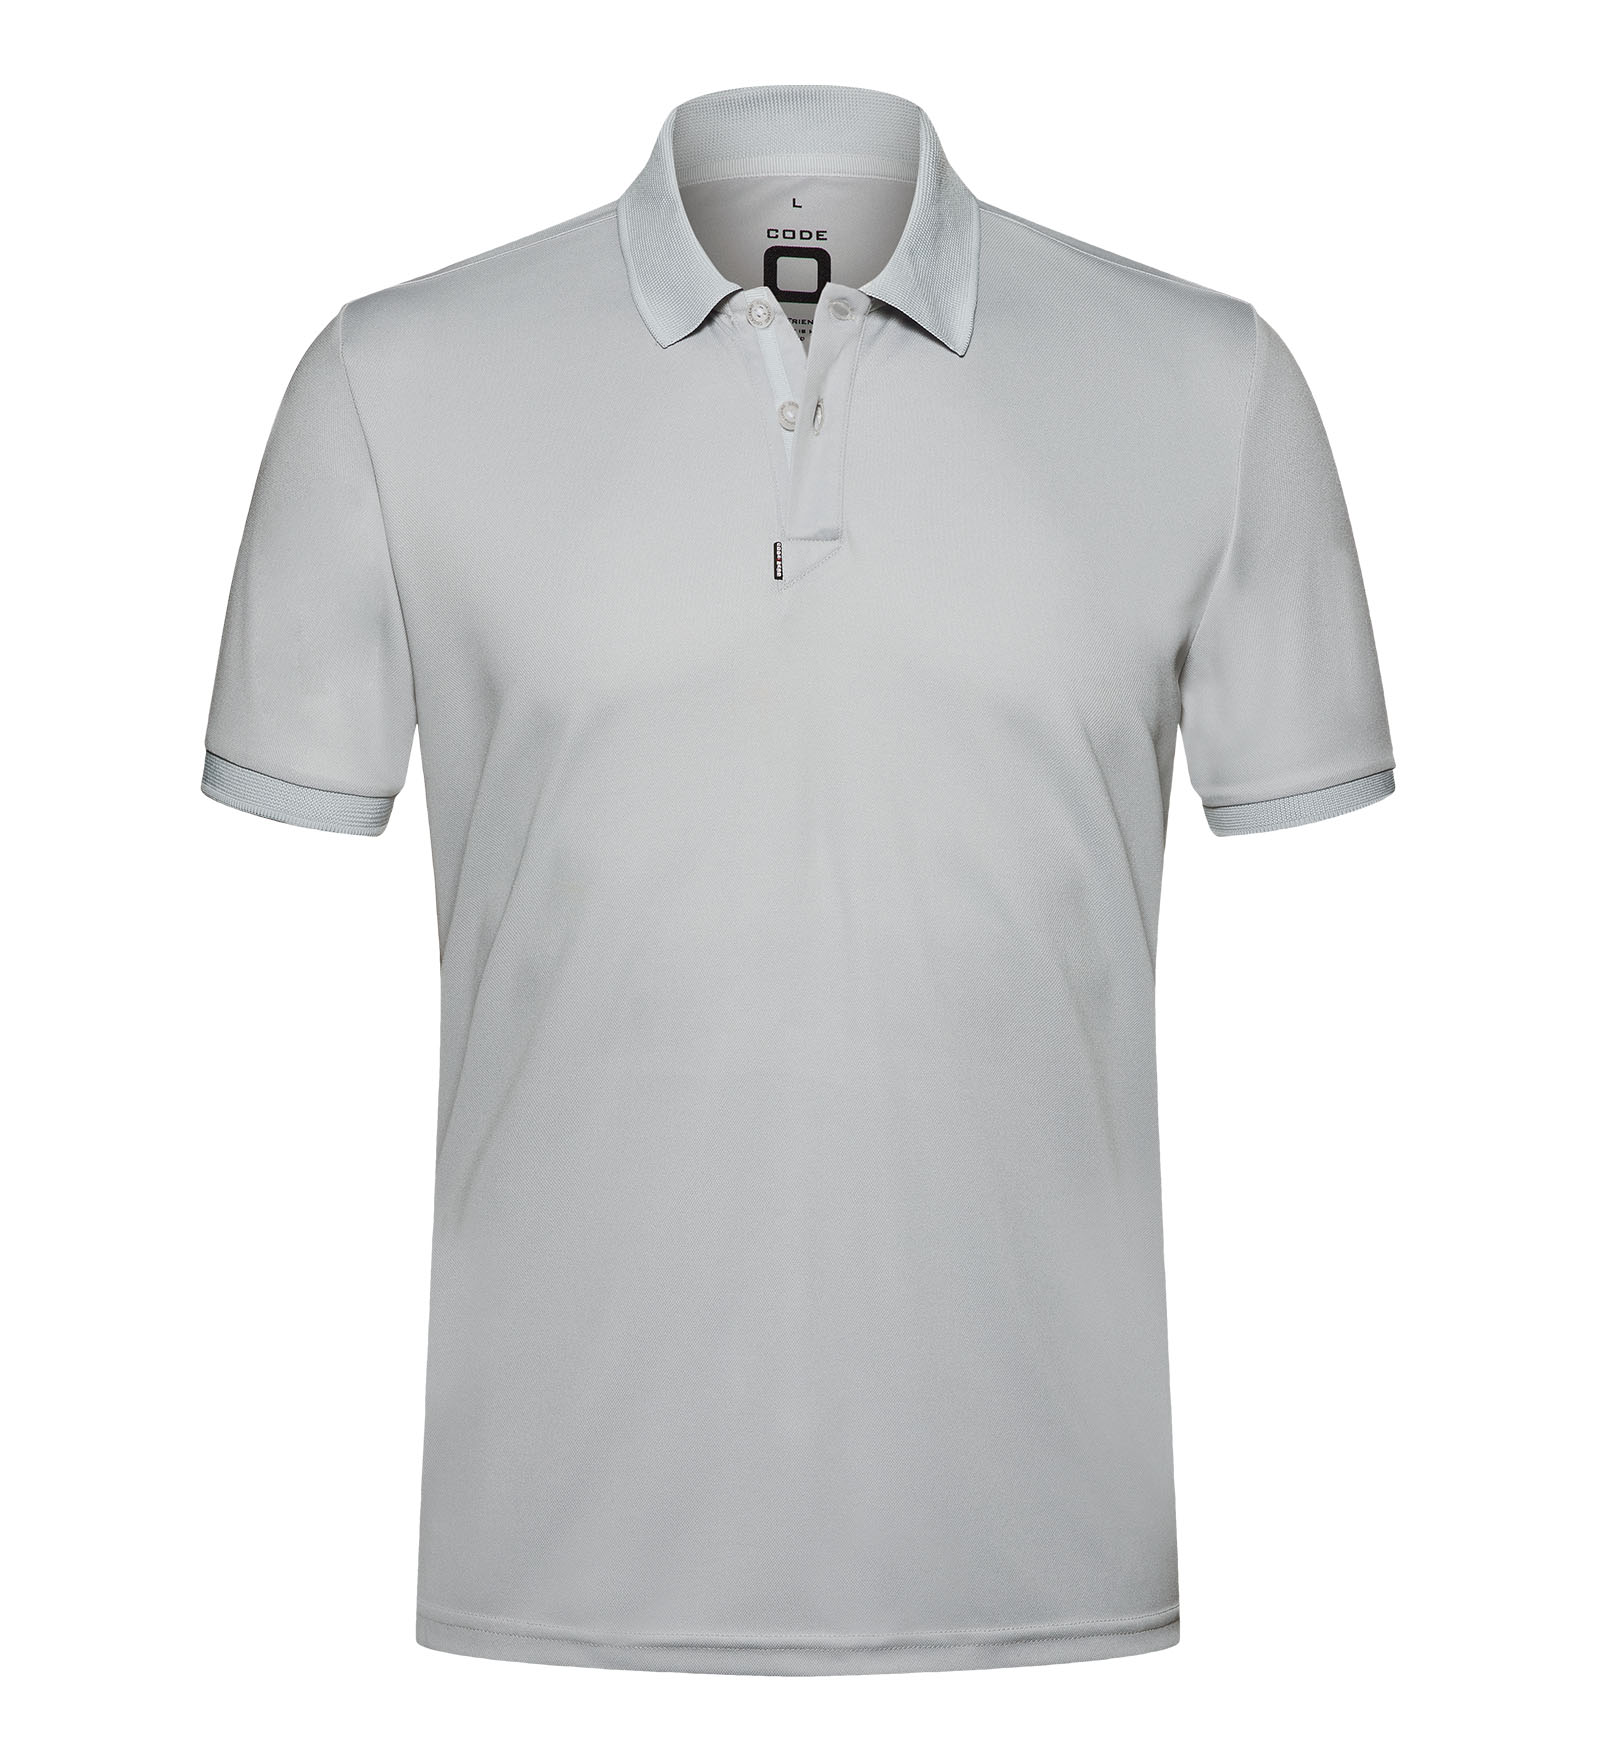 Free!! Get your first Separatec with code: Free2020  Mens polo t shirts,  Baby clothes sizes, Polo t shirts